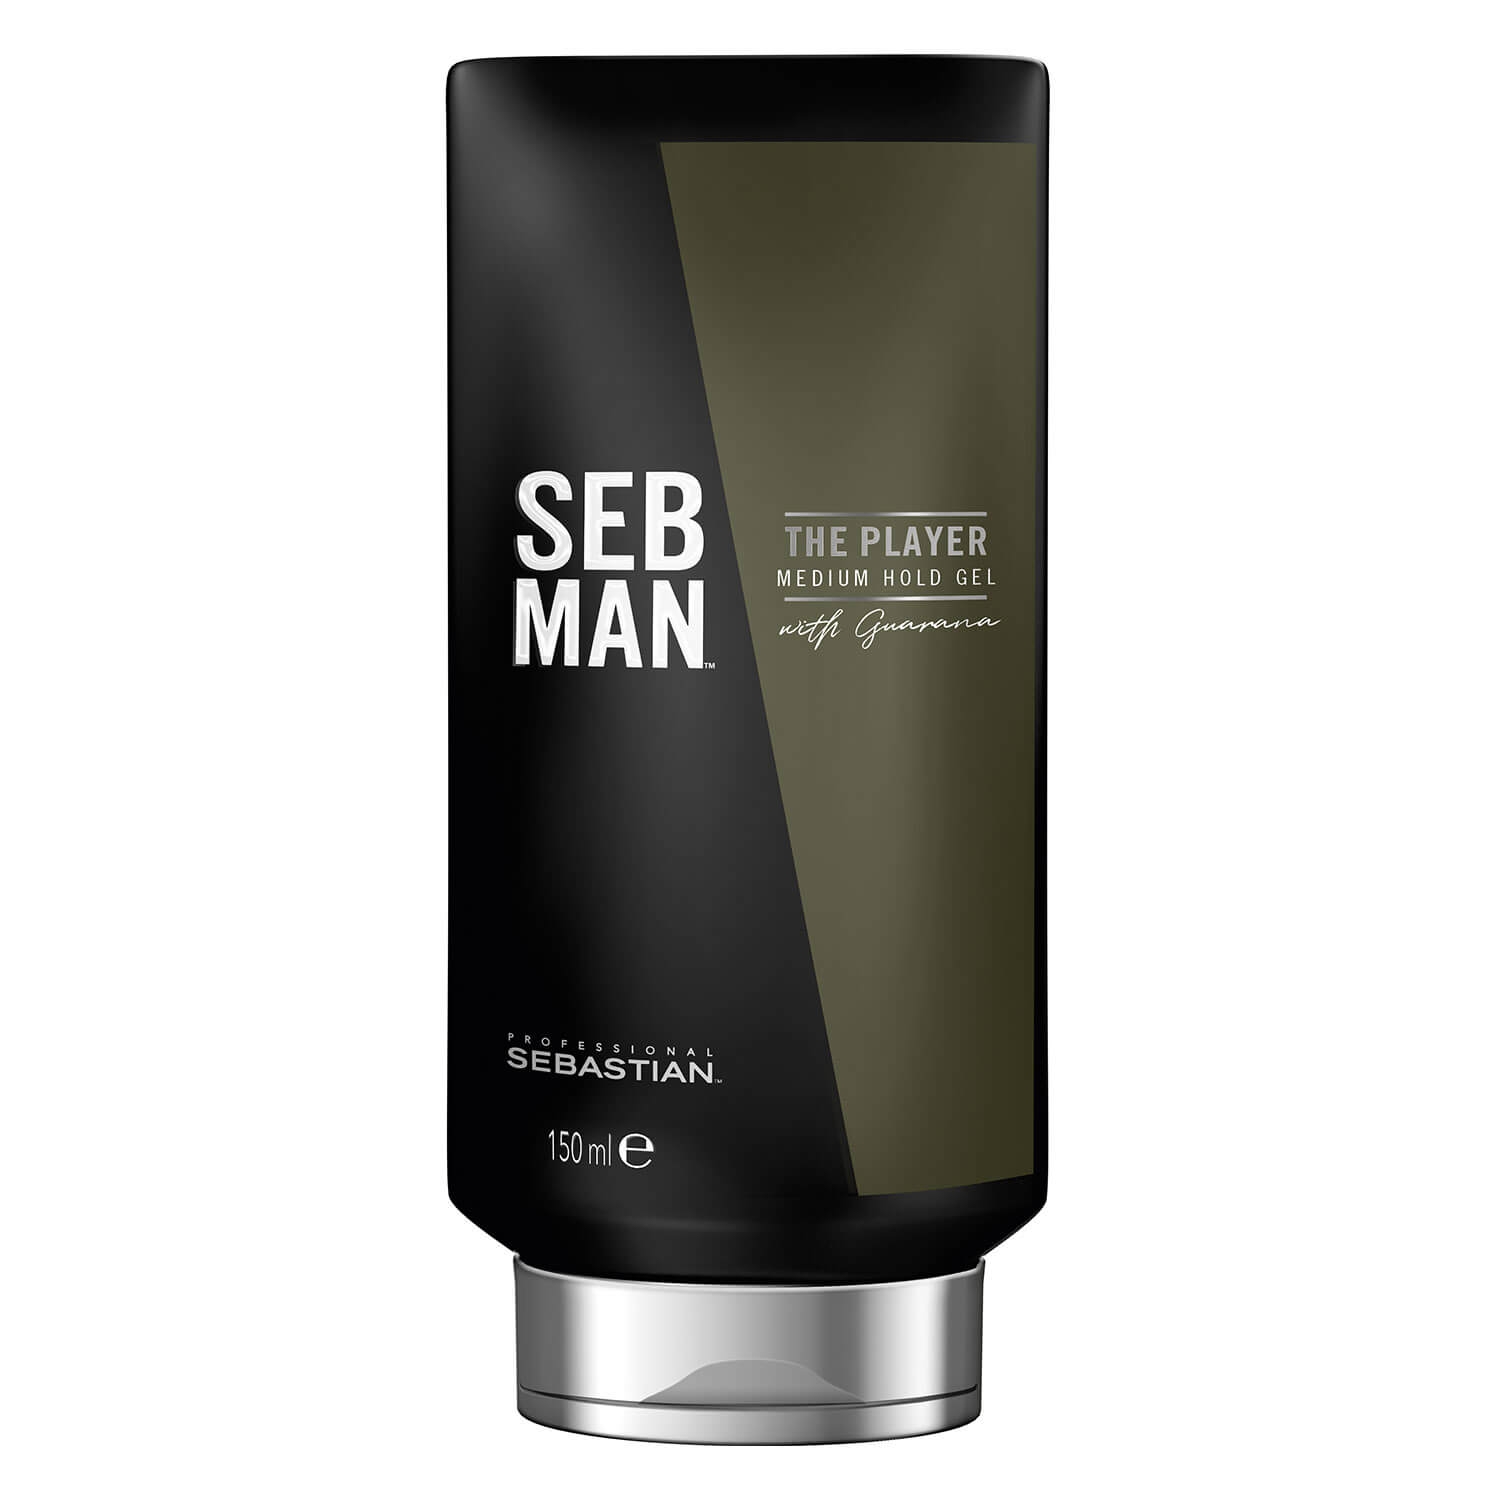 Product image from SEB MAN - The Player Medium Hold Gel